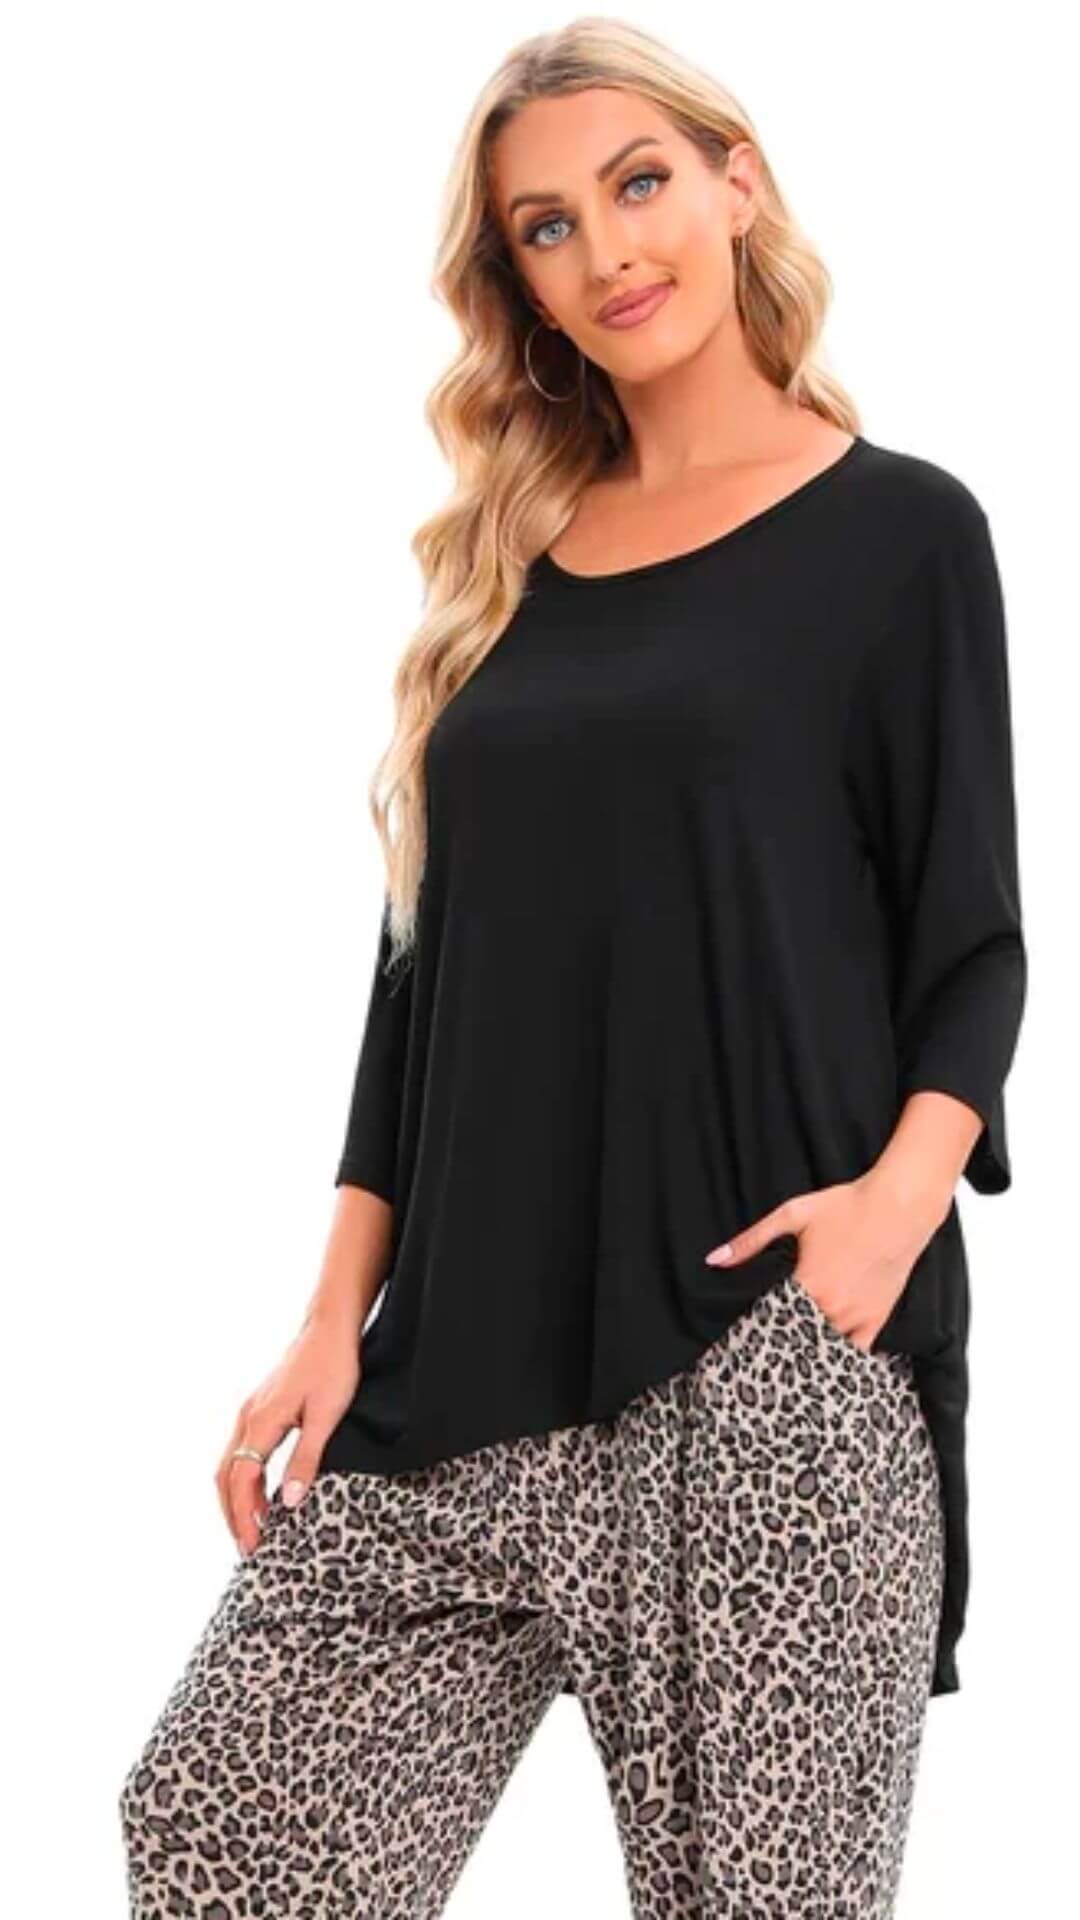 Women's clothing cotton top paired with leopard pants